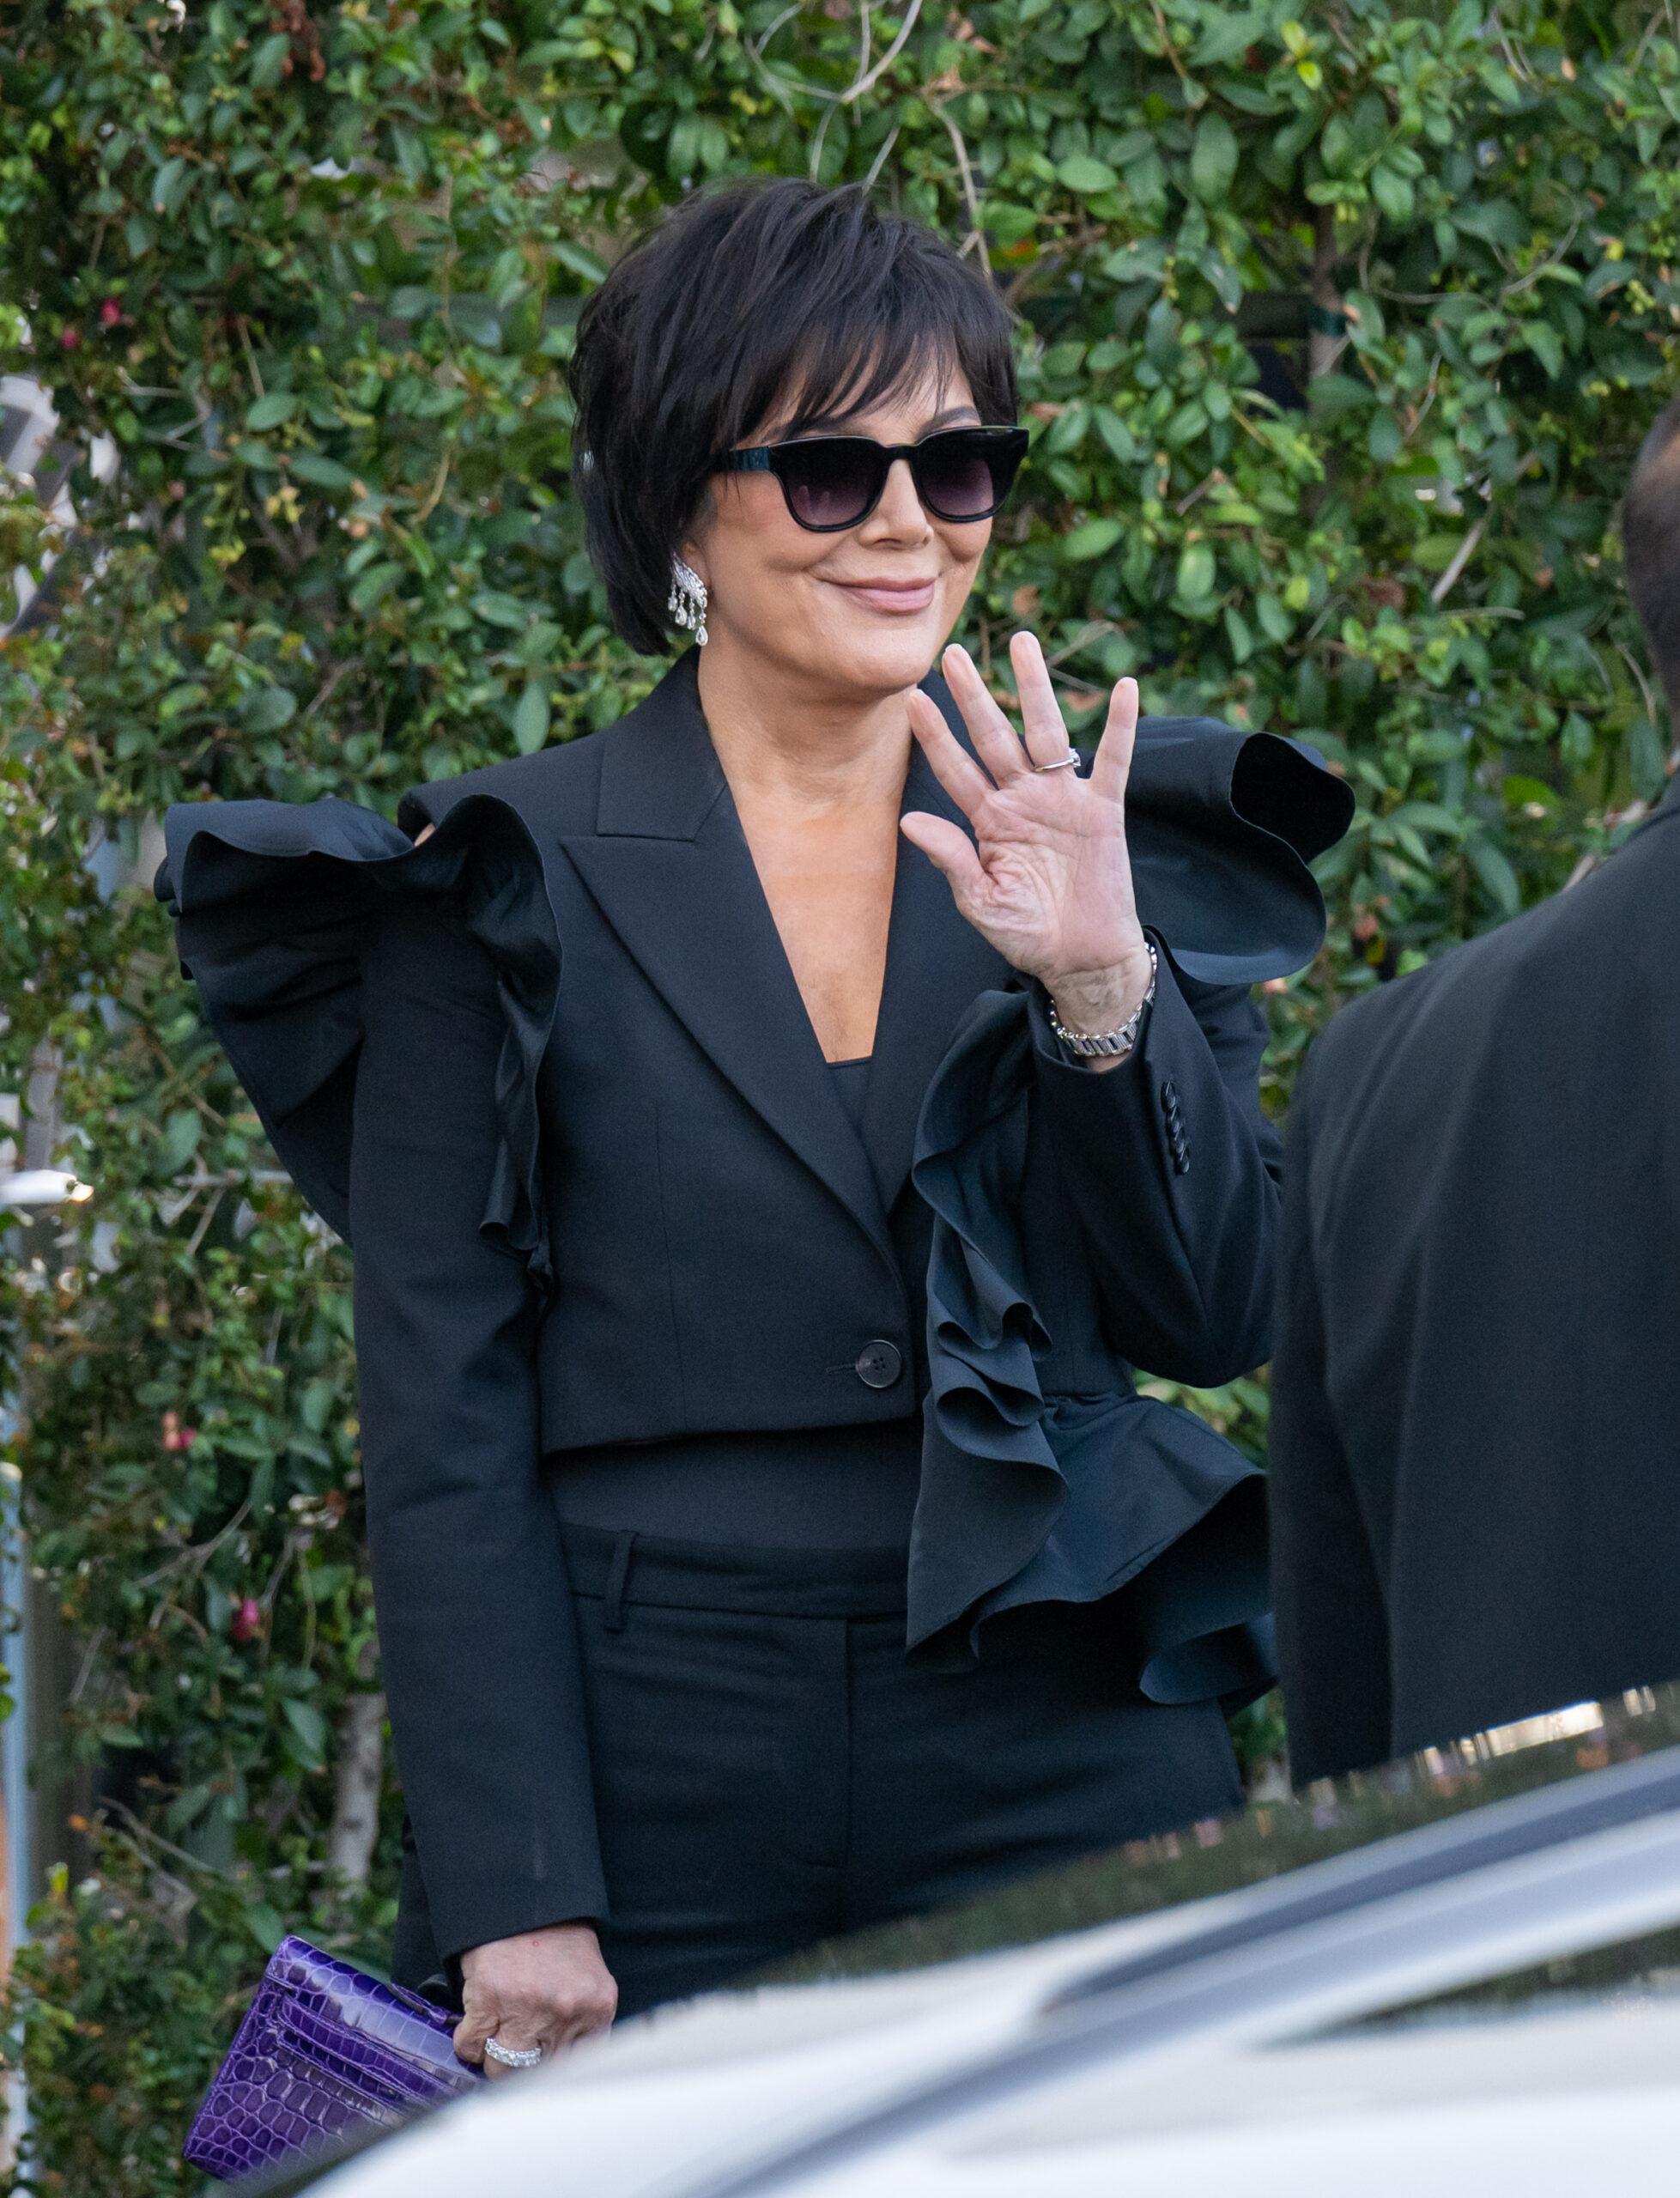 Kris Jenner and Khloe Kardashian are seen in Los Angeles, California.